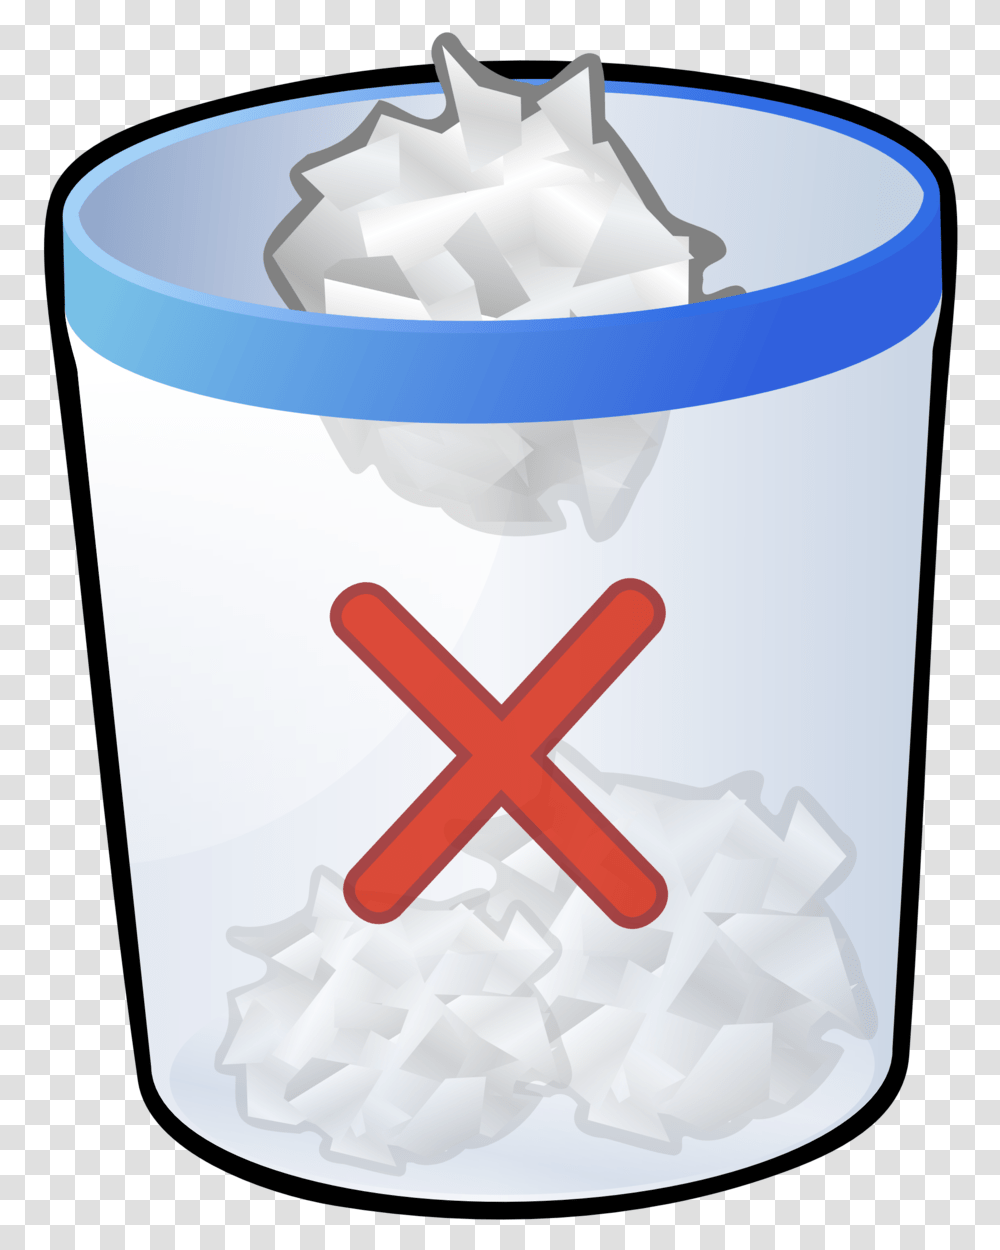 Bin With A Cross, Sugar, Food, Bottle Transparent Png